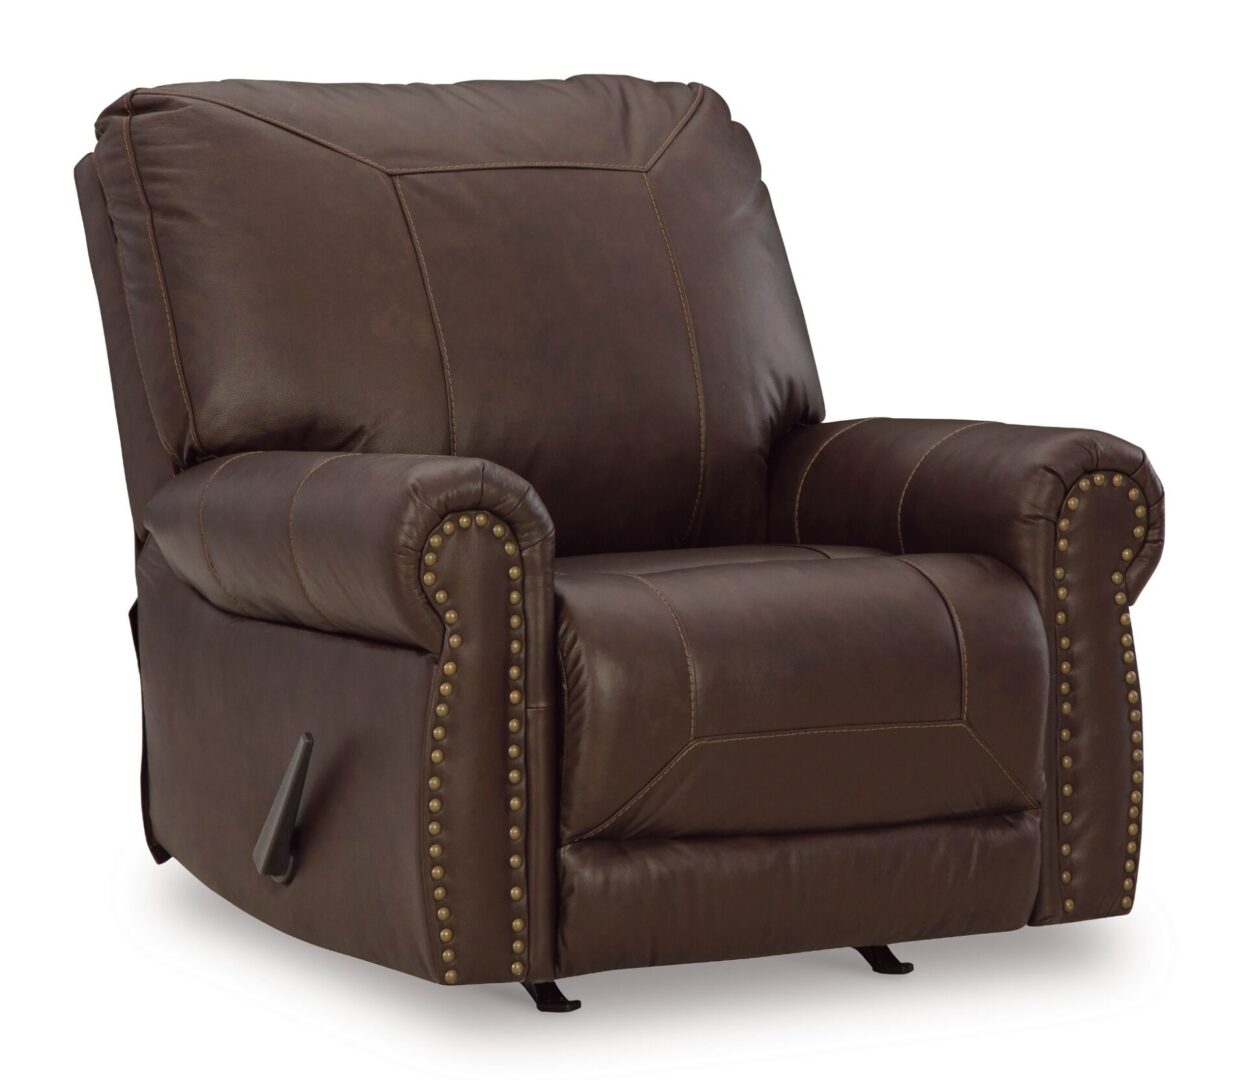 A brown leather recliner with nailhead trim.